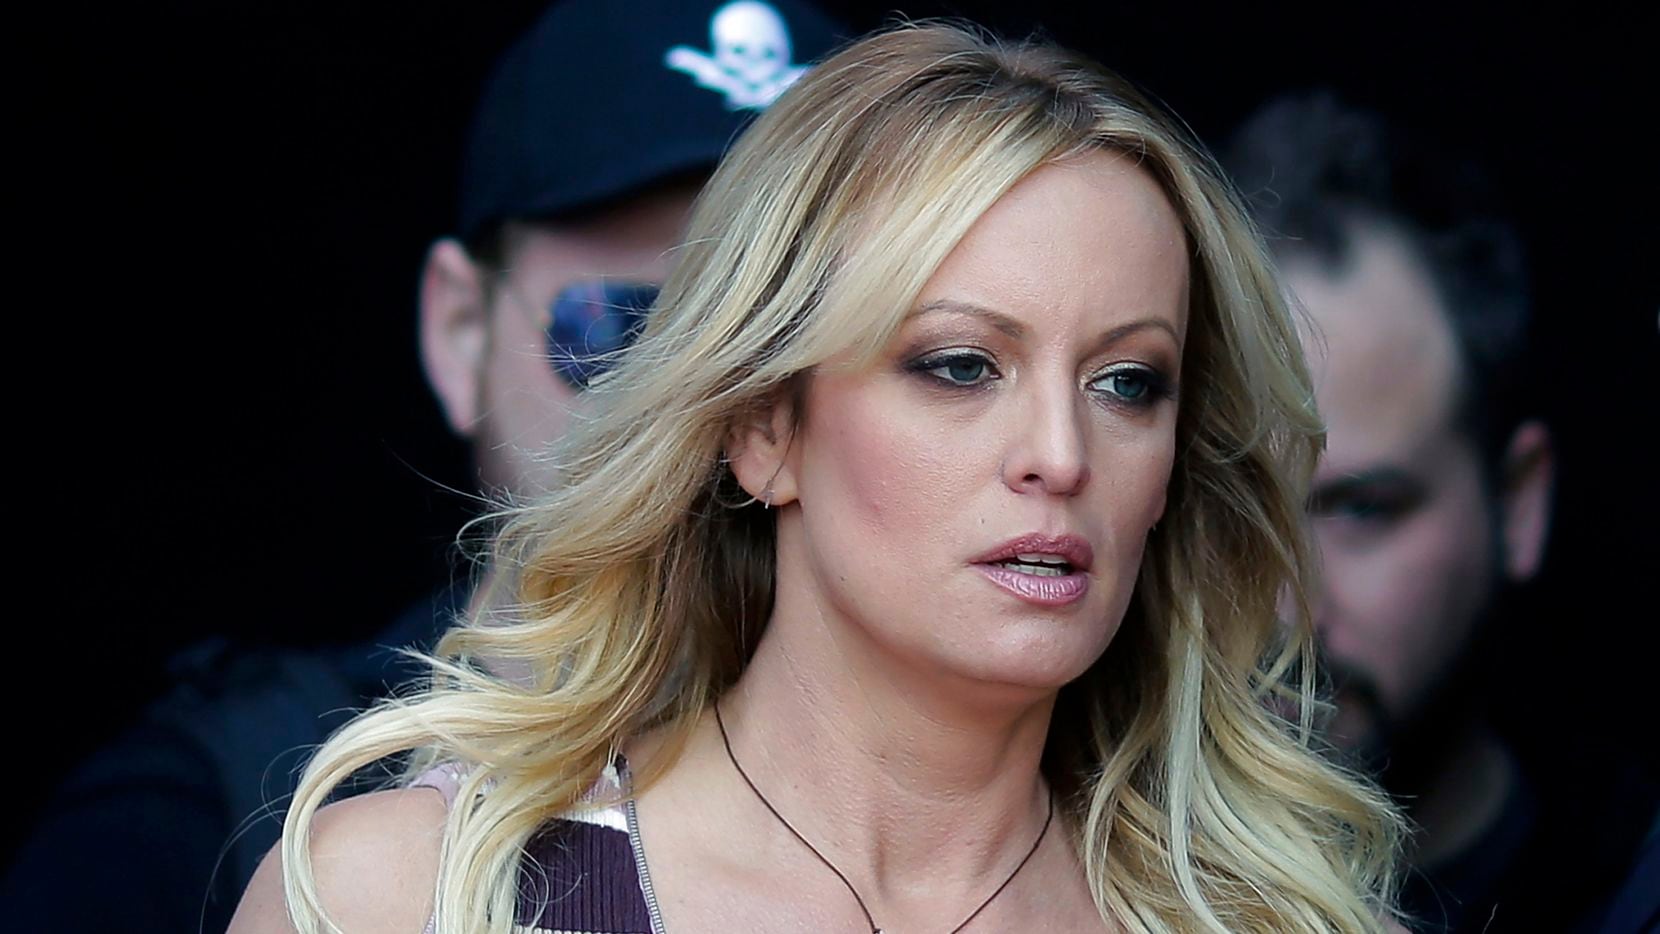 What To Know About Stormy Daniels And Her Ties To North Texas